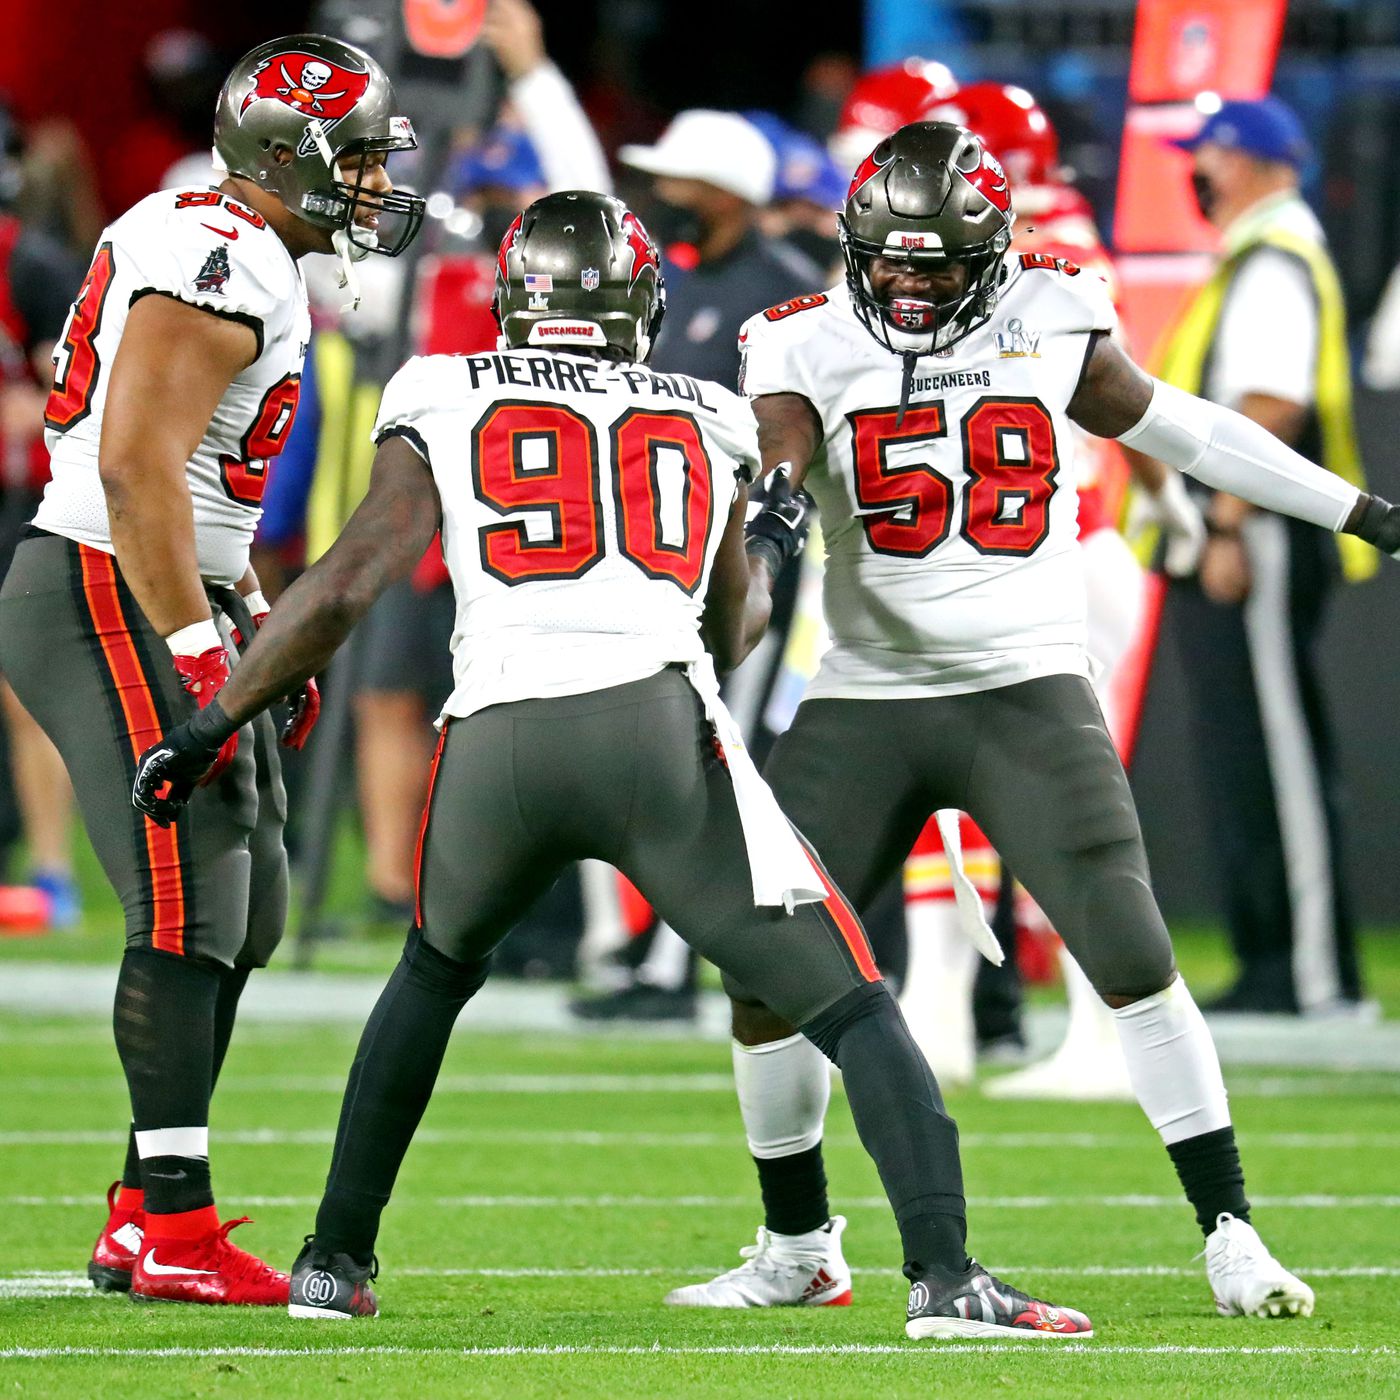 Super Bowl 2021: The Bucs got every call against the Chiefs